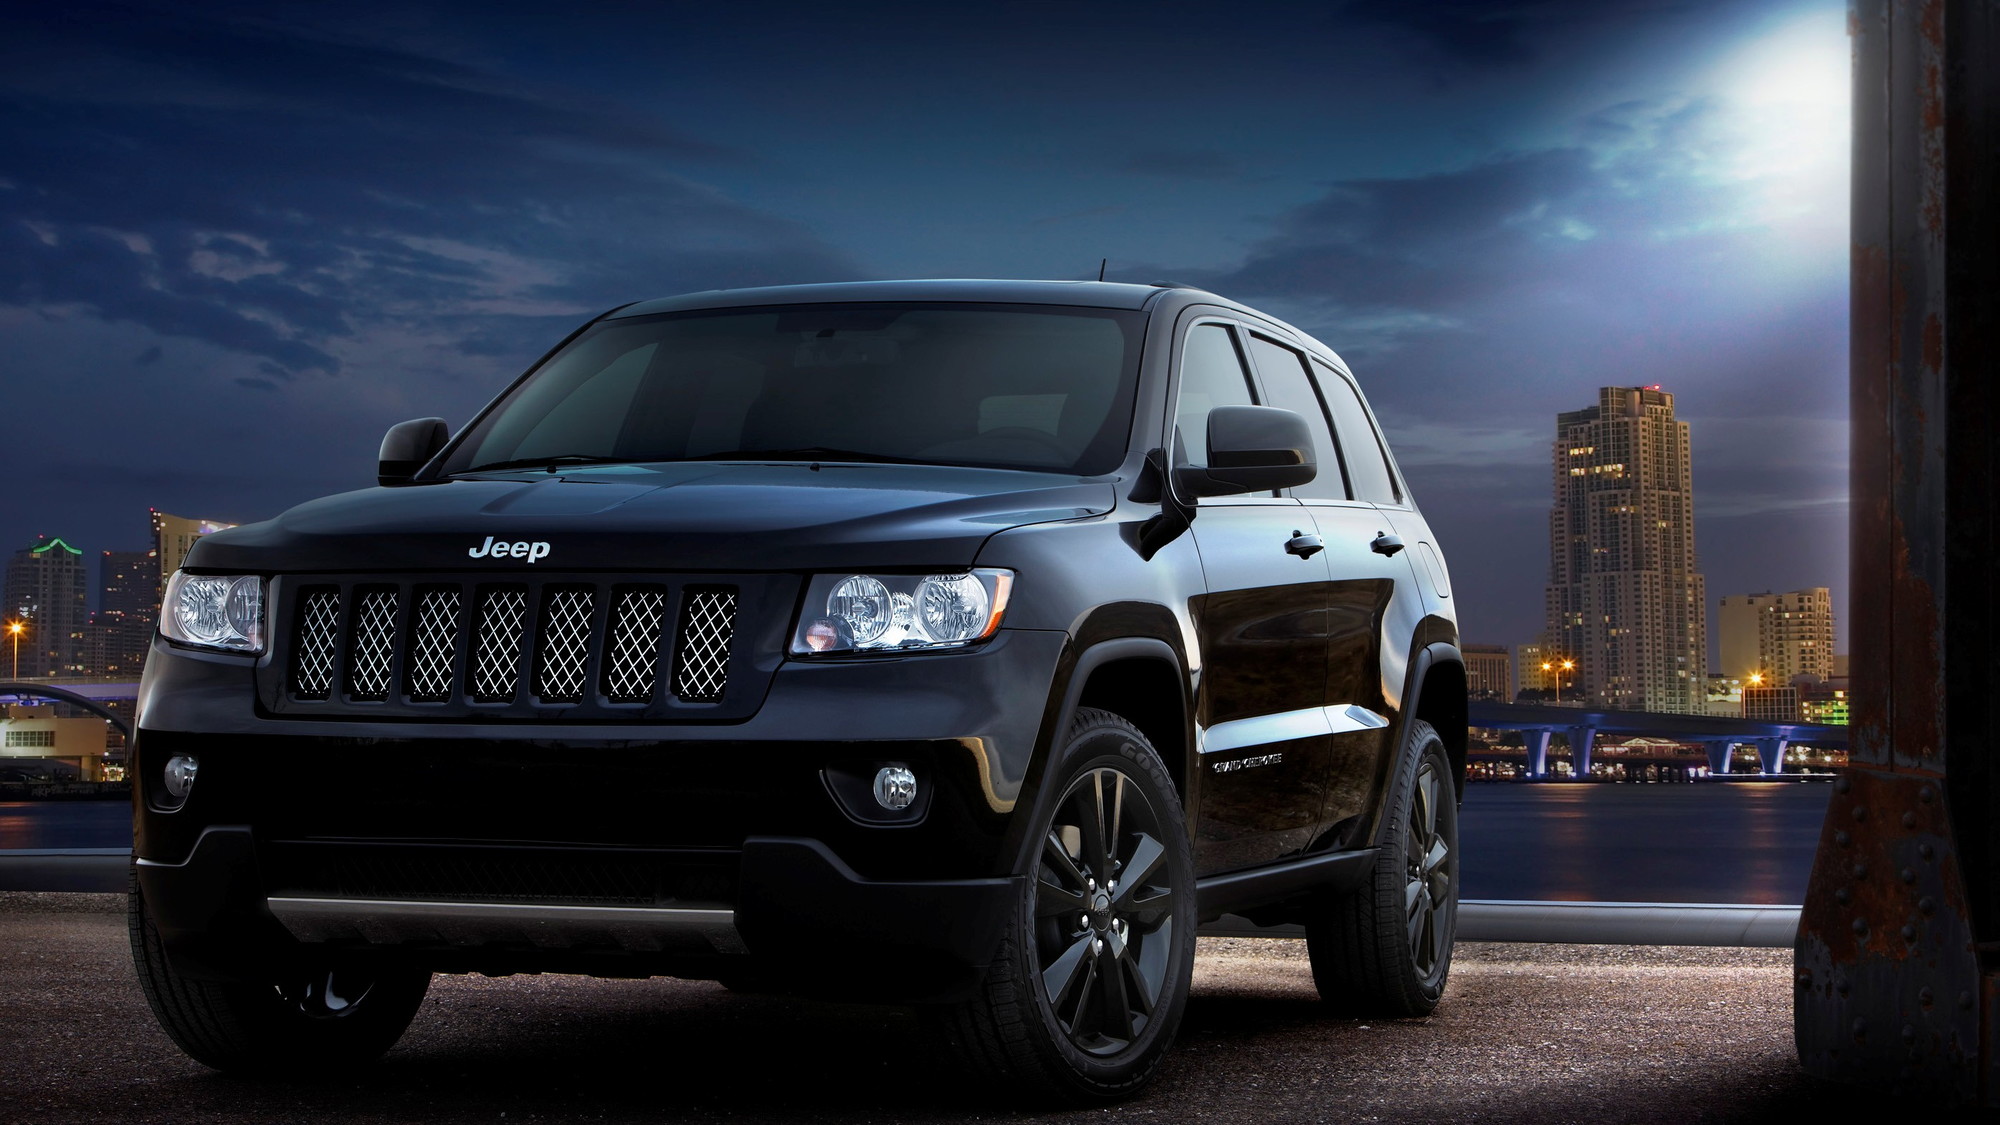 2012 Jeep Altitude editions of Grand Cherokee, Compass, and Patriot